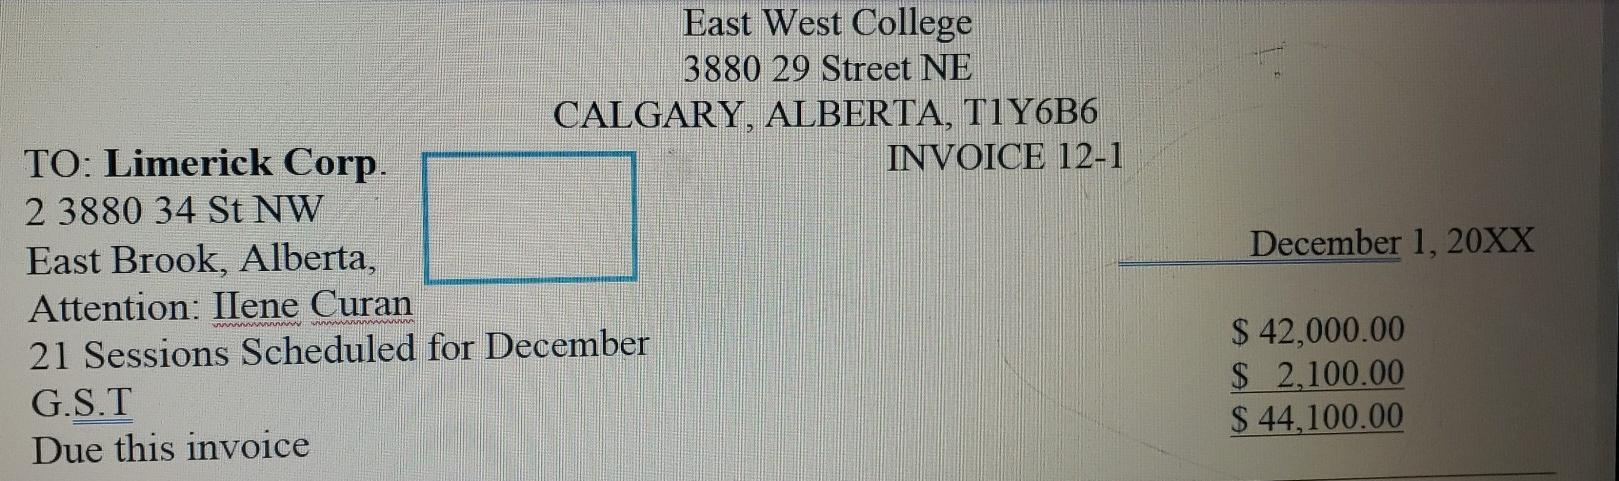 East West College 3880 29 Street NE CALGARY, ALBERTA, T1Y6B6 TO: Limerick Corp. INVOICE 12-1 2 3880 34 St NW East Brook, Albe